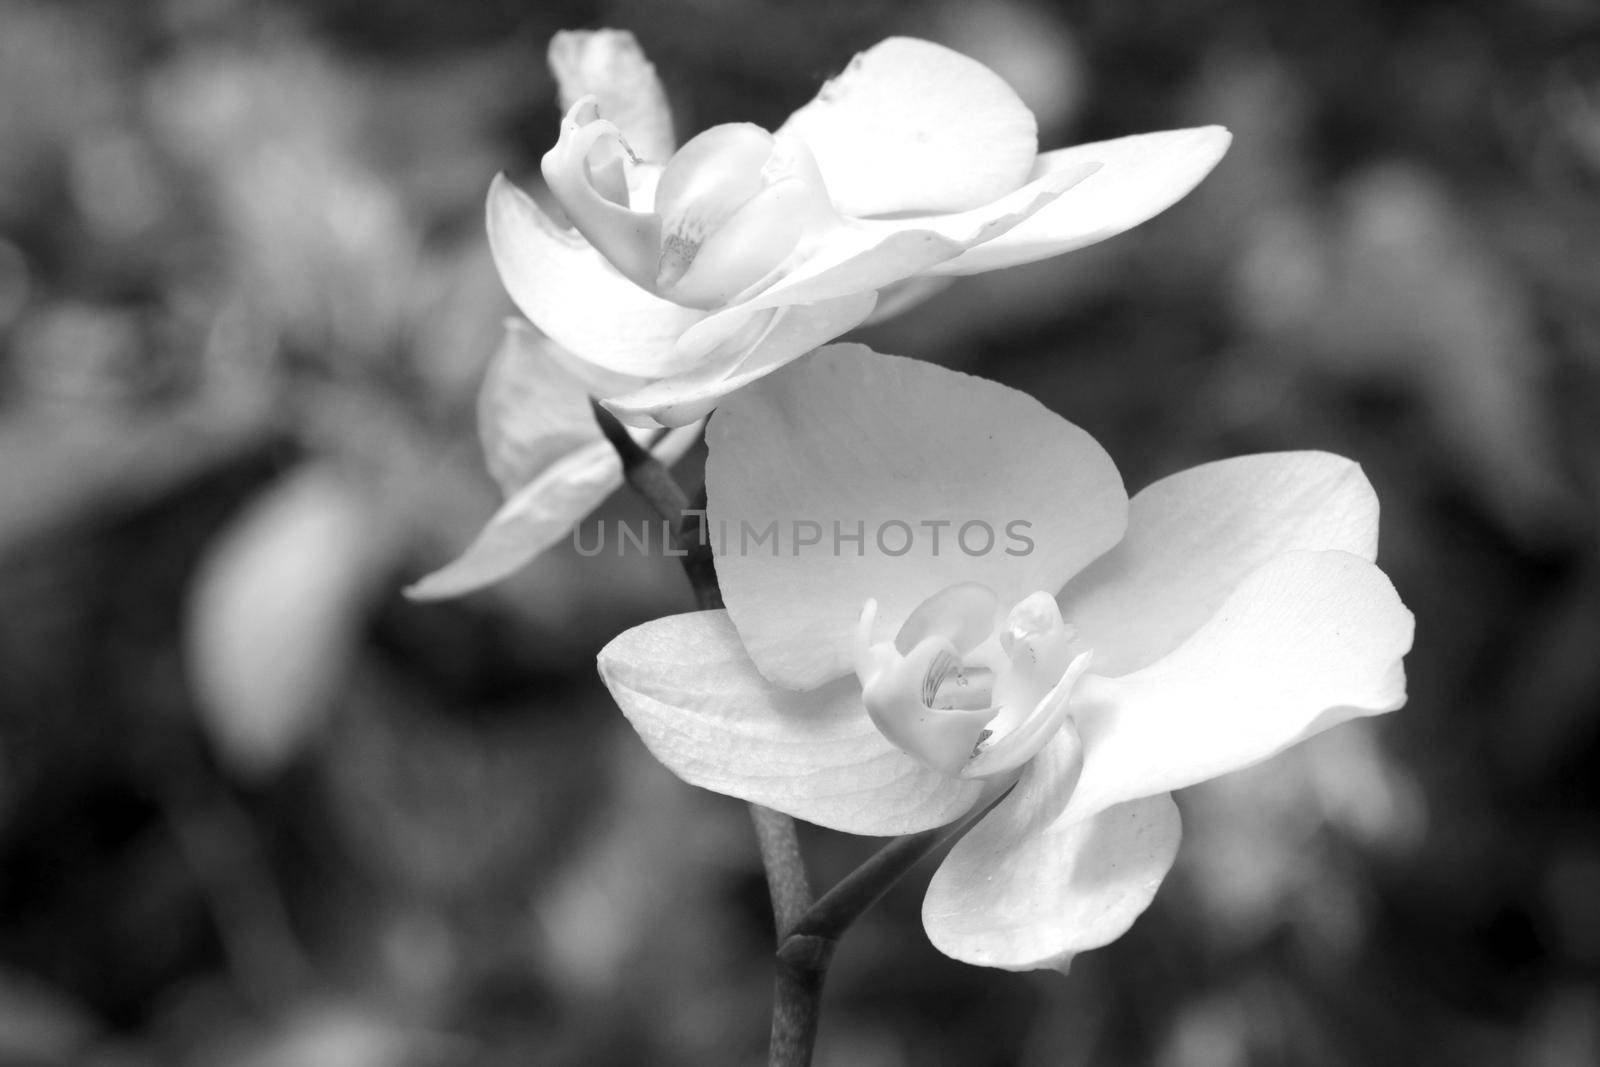 Black and white photo. Close-up of a flowering branch of an orchid